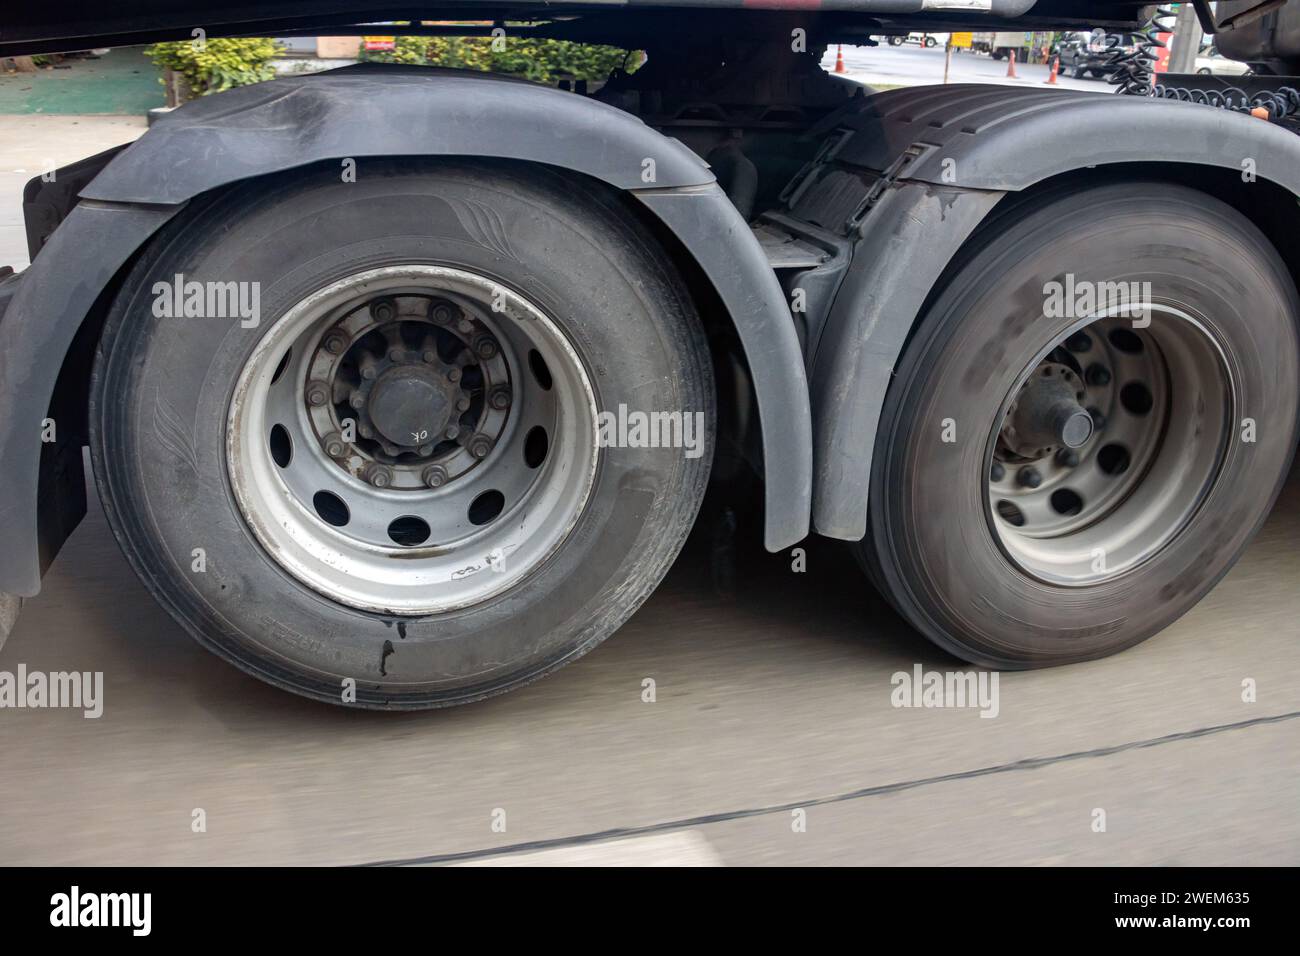 View of the rear wheels of a truck while driving with the rear axle raised Stock Photo